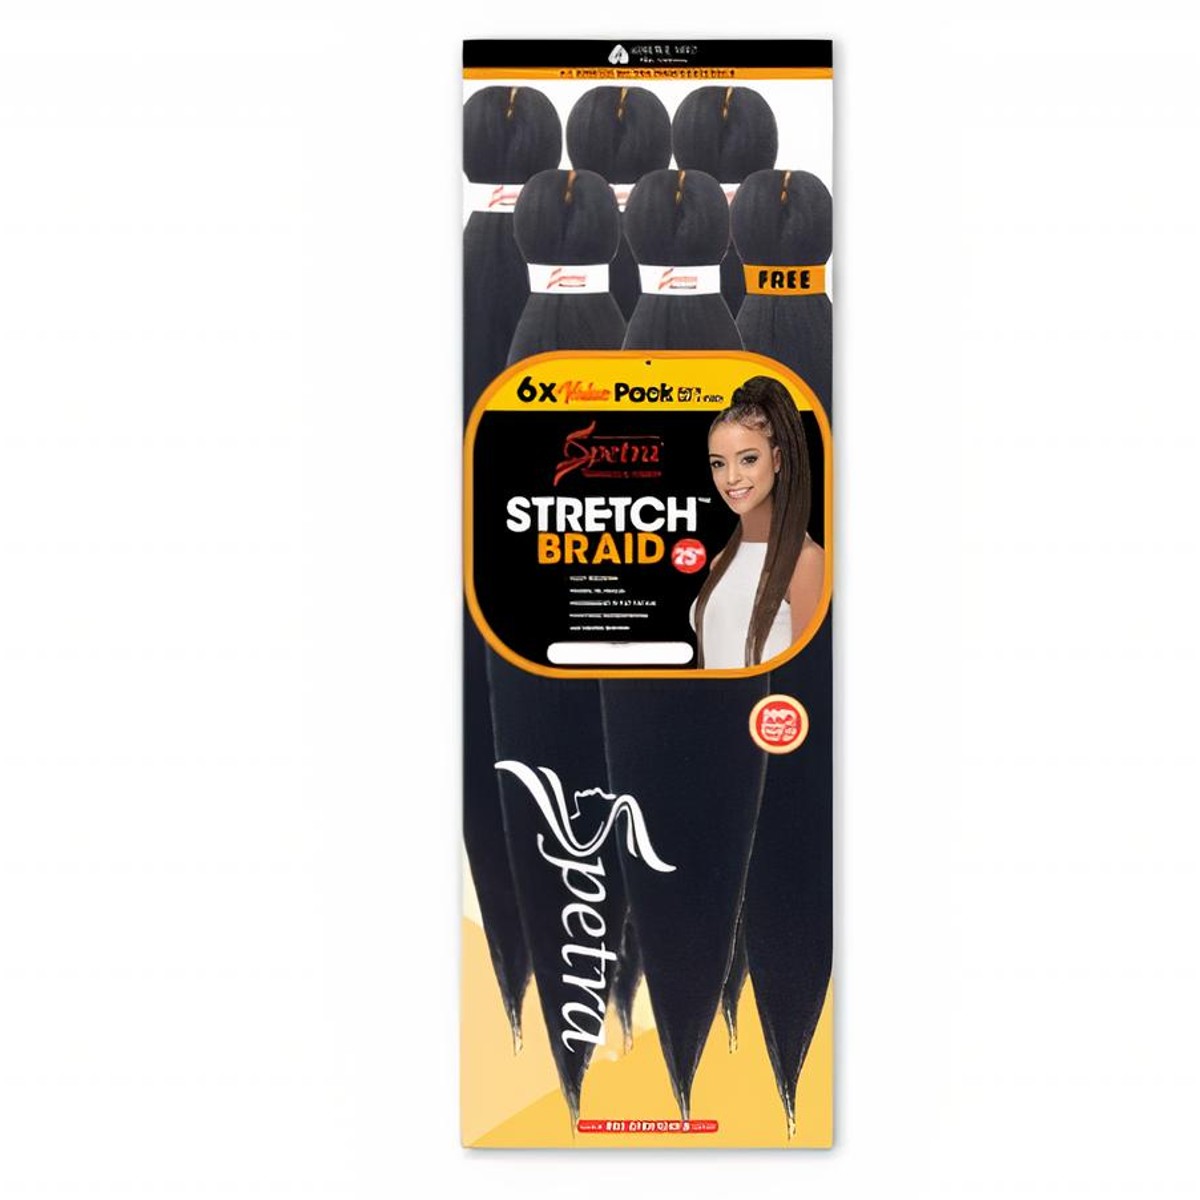 Spetra Pre-Stretched Braiding Hair Triple Packs, Beauty Club Outlet